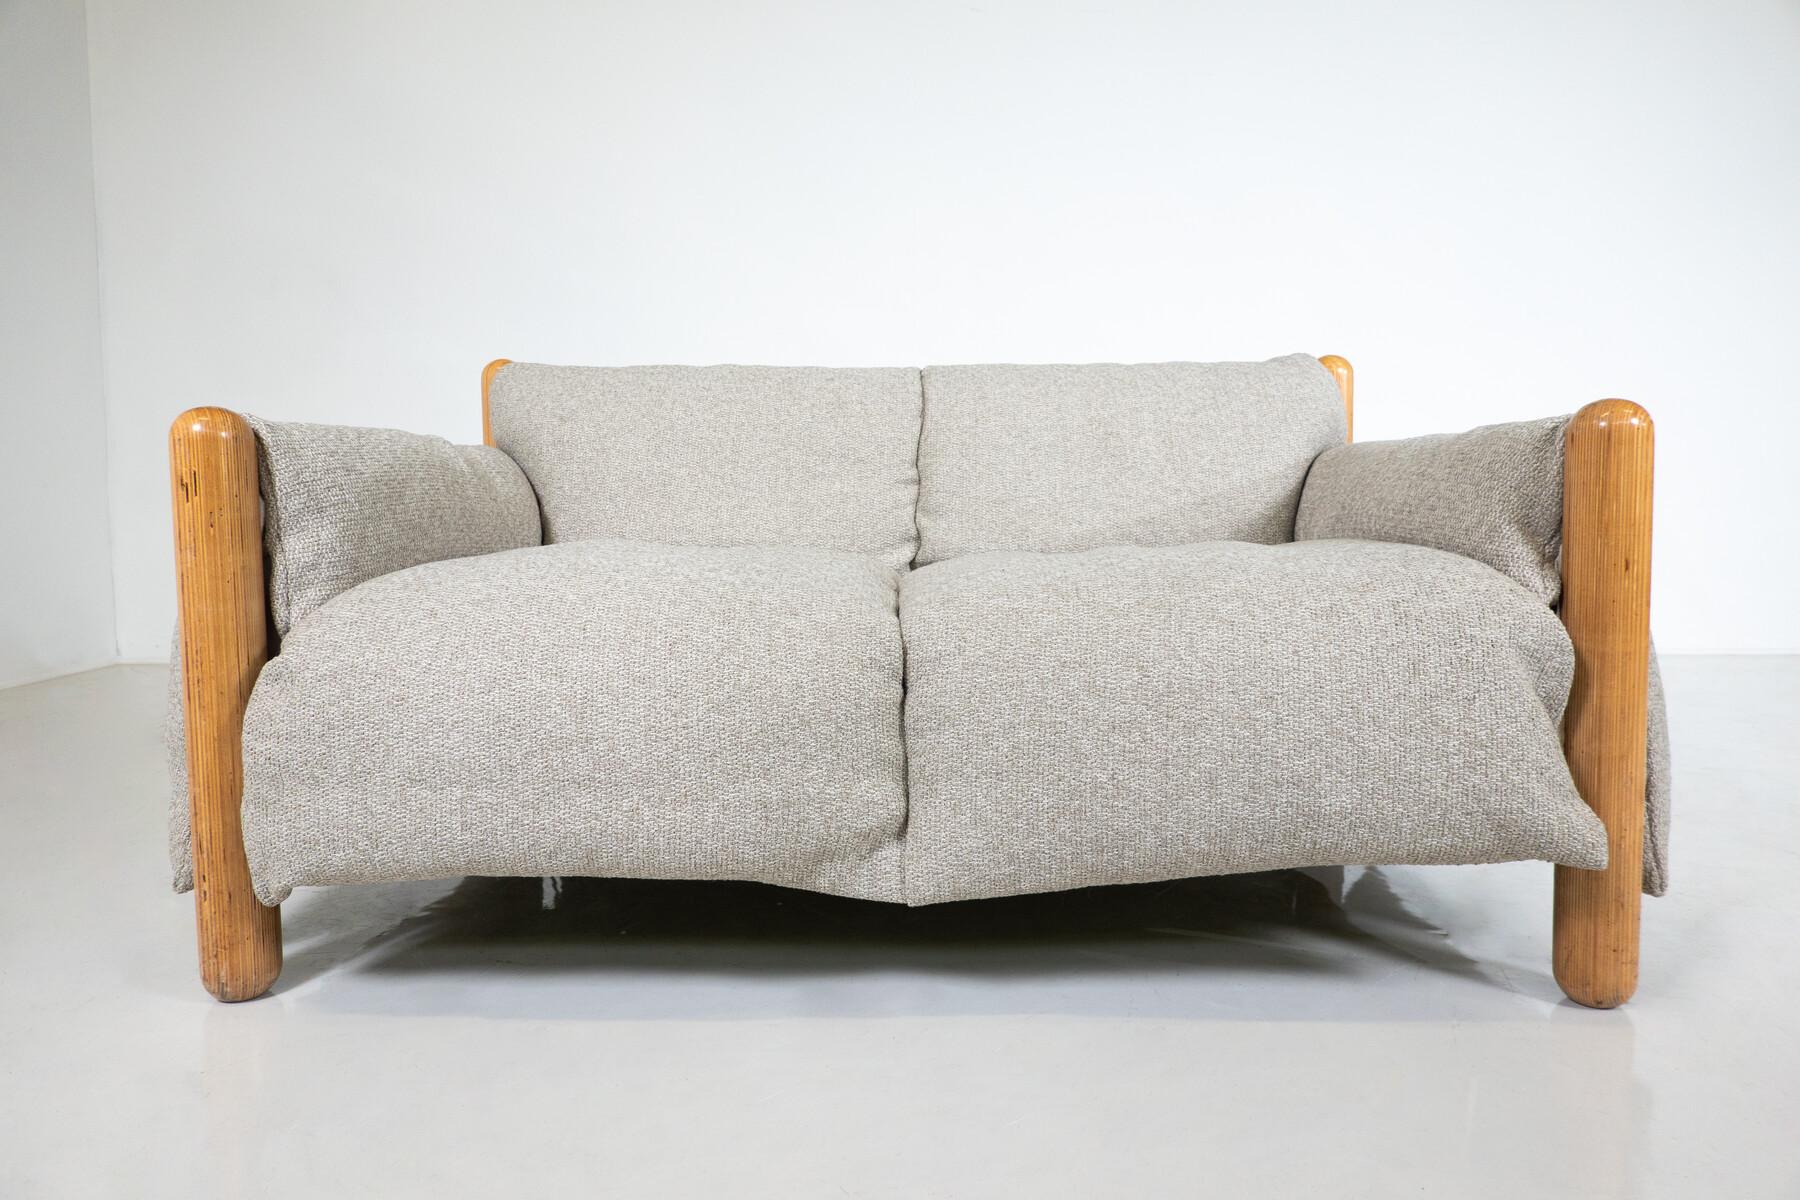 Mid-Century Modern Gambadilegno Sofa by Enzo Mari for Driade, Italy, 1974 In Good Condition For Sale In Brussels, BE